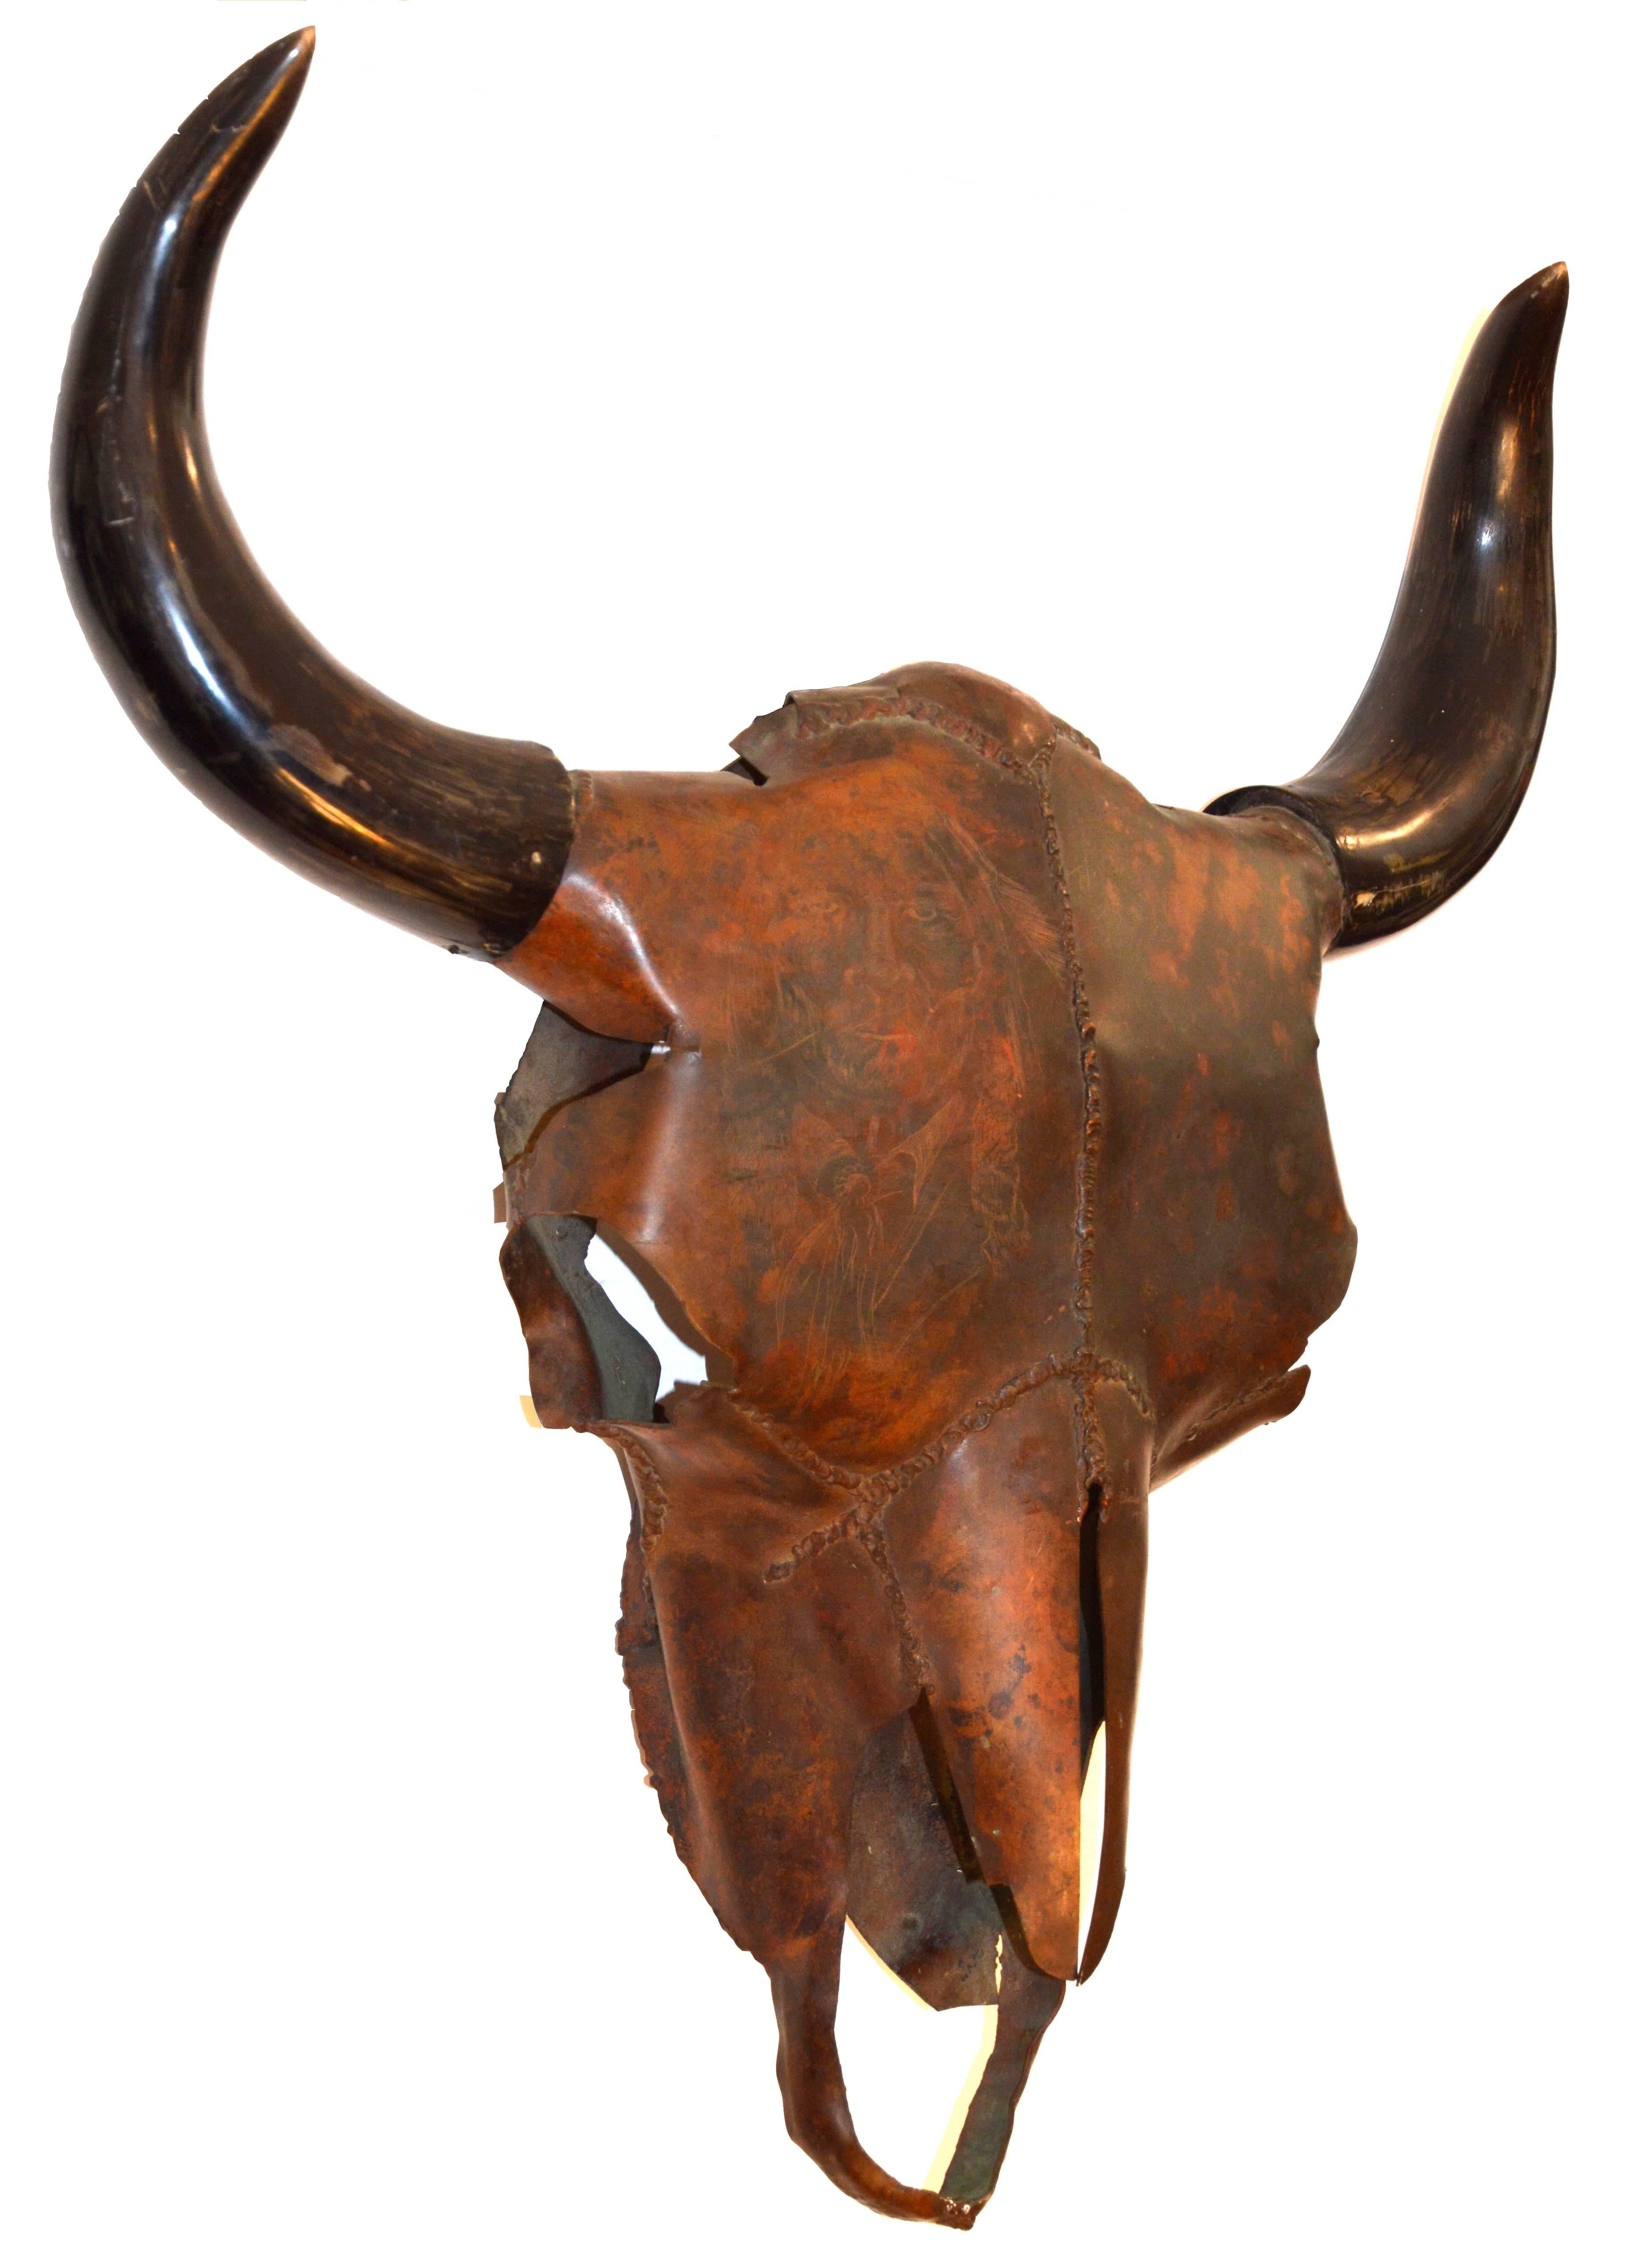 Native American Copper Bison Head Sculpture, Signed and Dated 1977